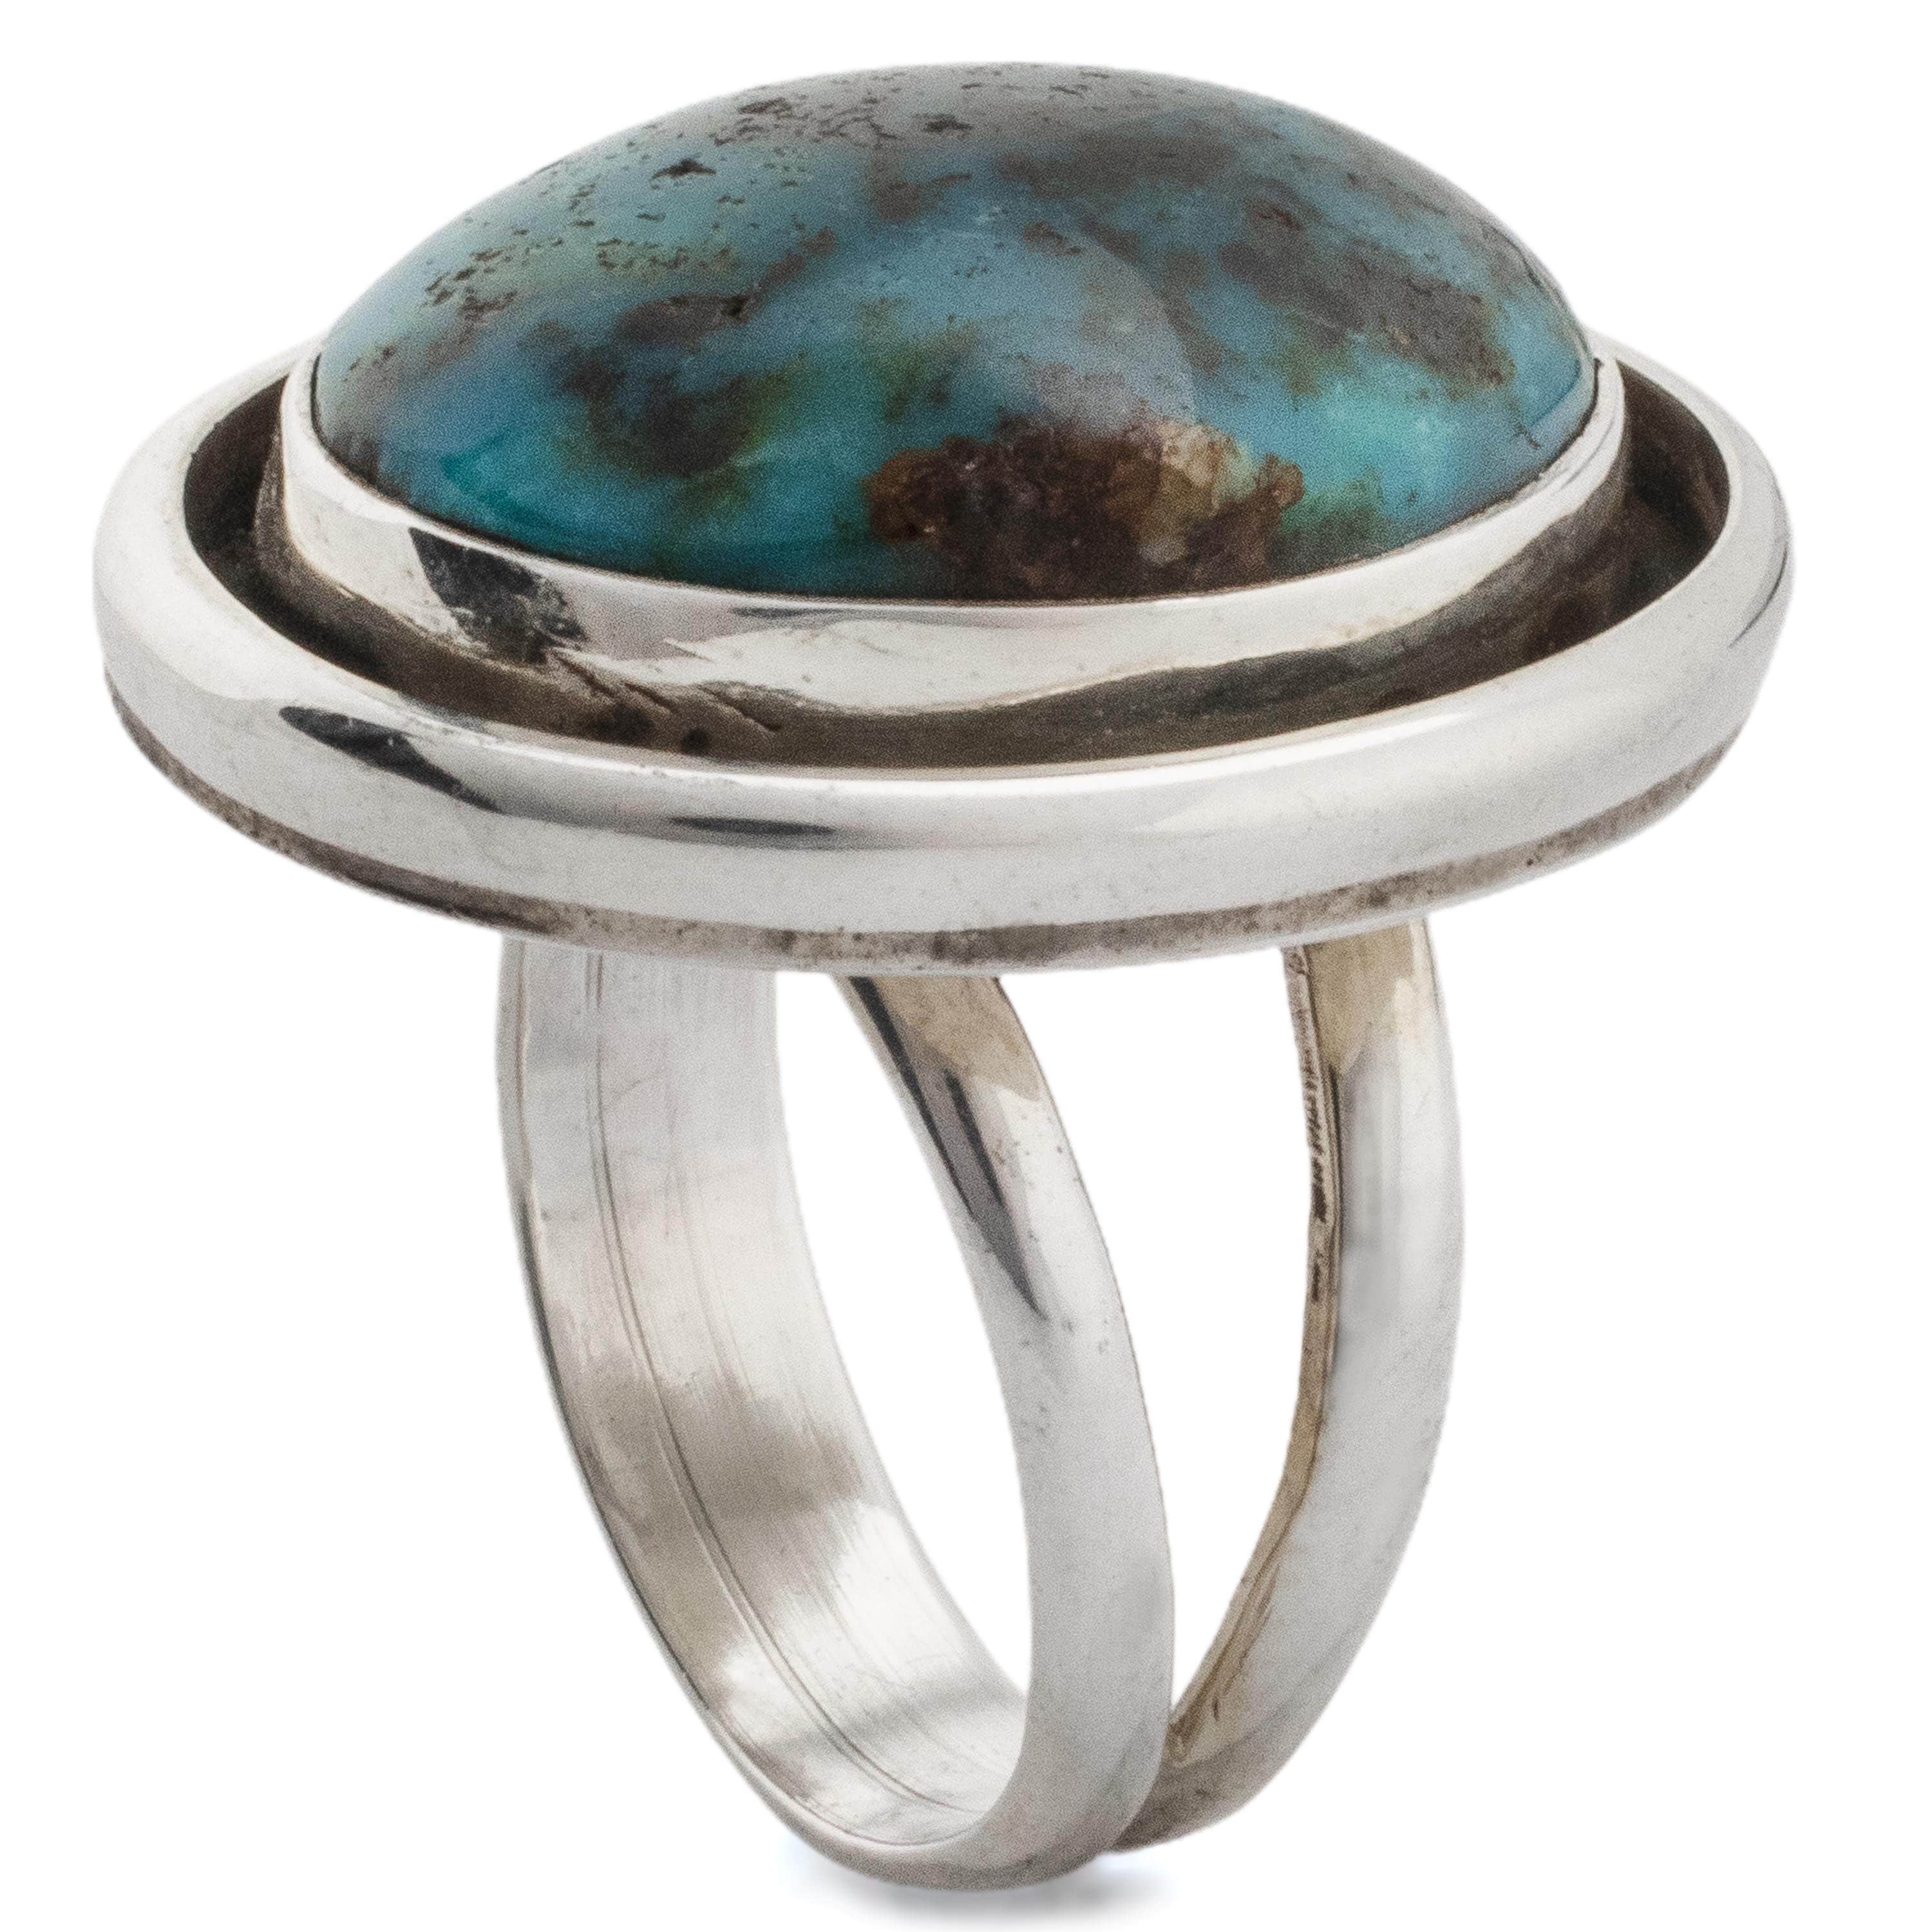 Kalifano Native American Jewelry 7 Eygptian Turquoise USA Native American Made 925 Sterling Silver Adaptive Ring NAR600.030.7